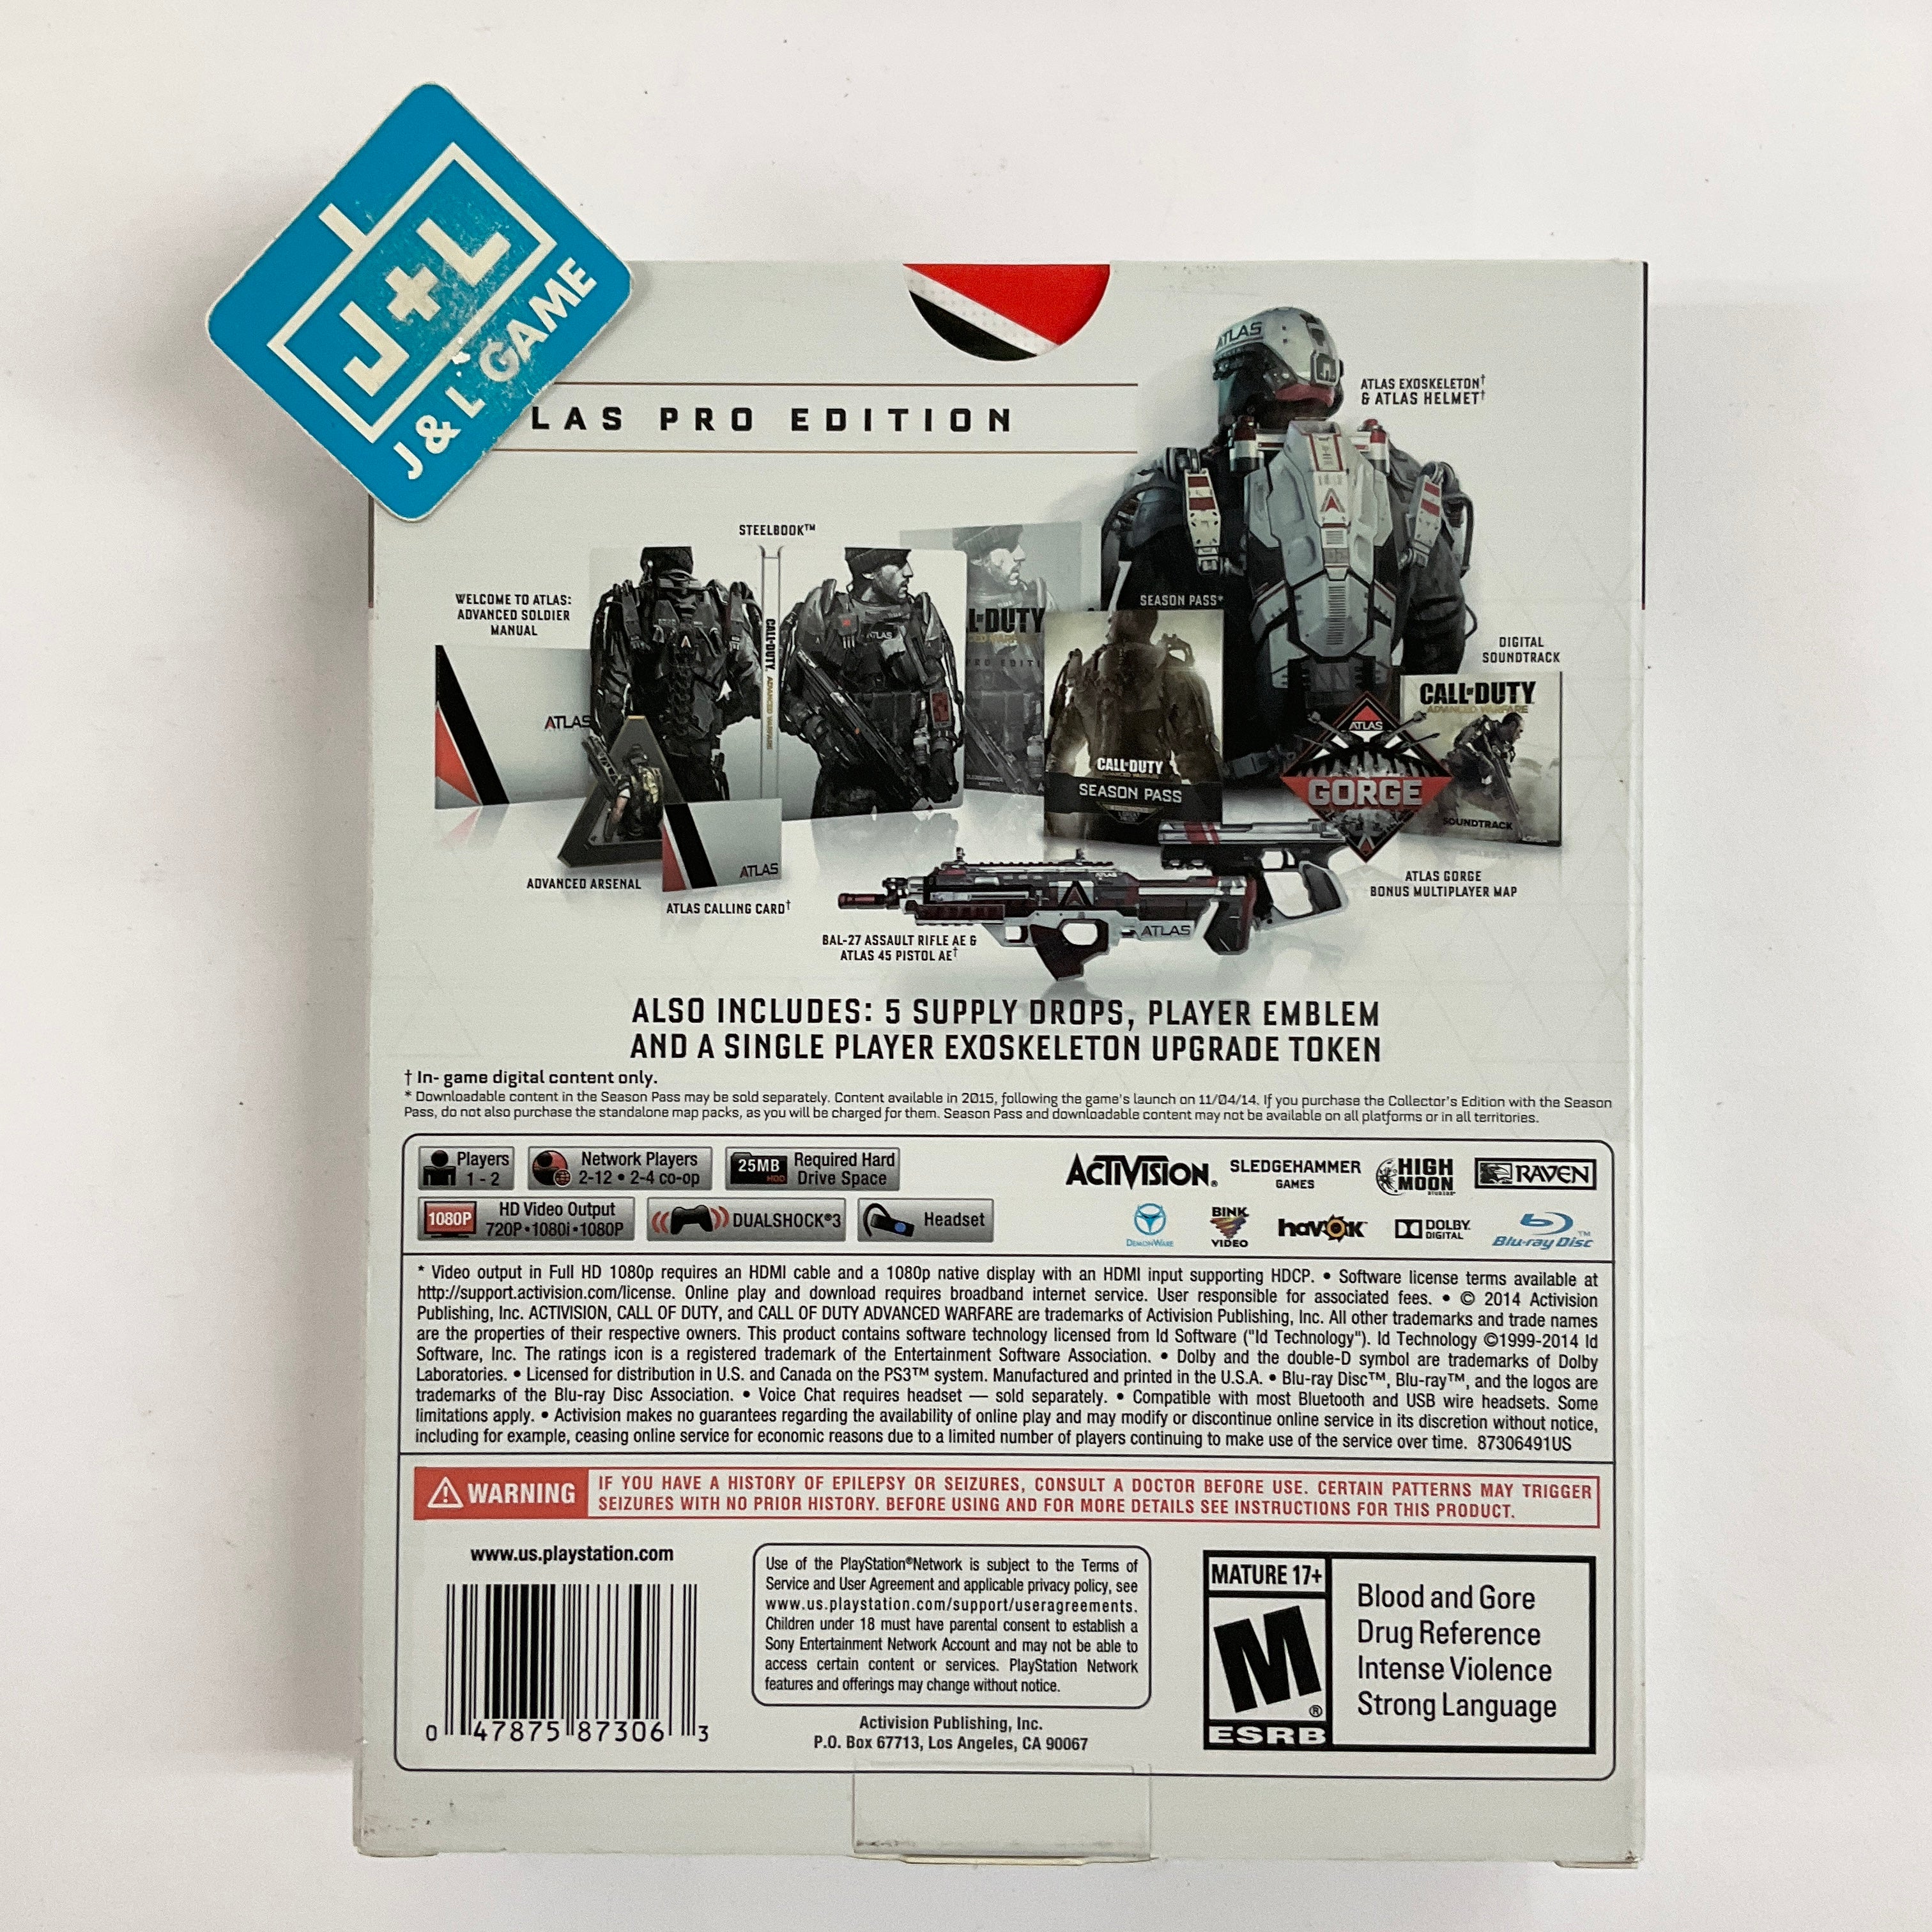 Call of Duty: Advanced Warfare (Atlas Limited Edition) - (PS3) PlayStation 3 [Pre-Owned] Video Games Activision   